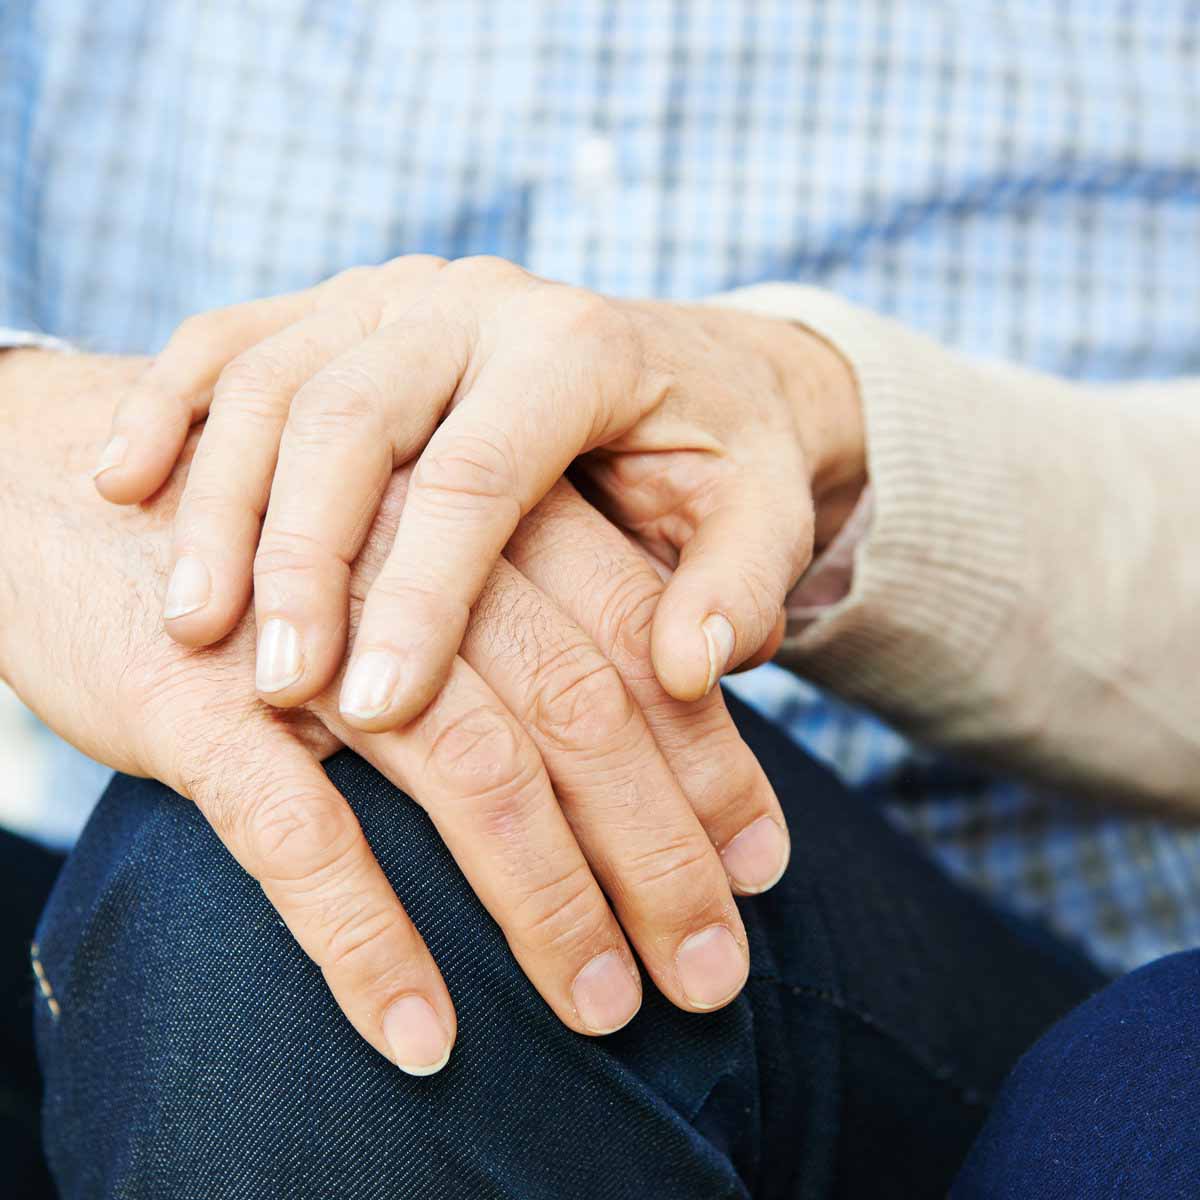 An elderly woman holds the hand of an elderly man to comfort him through a challenge